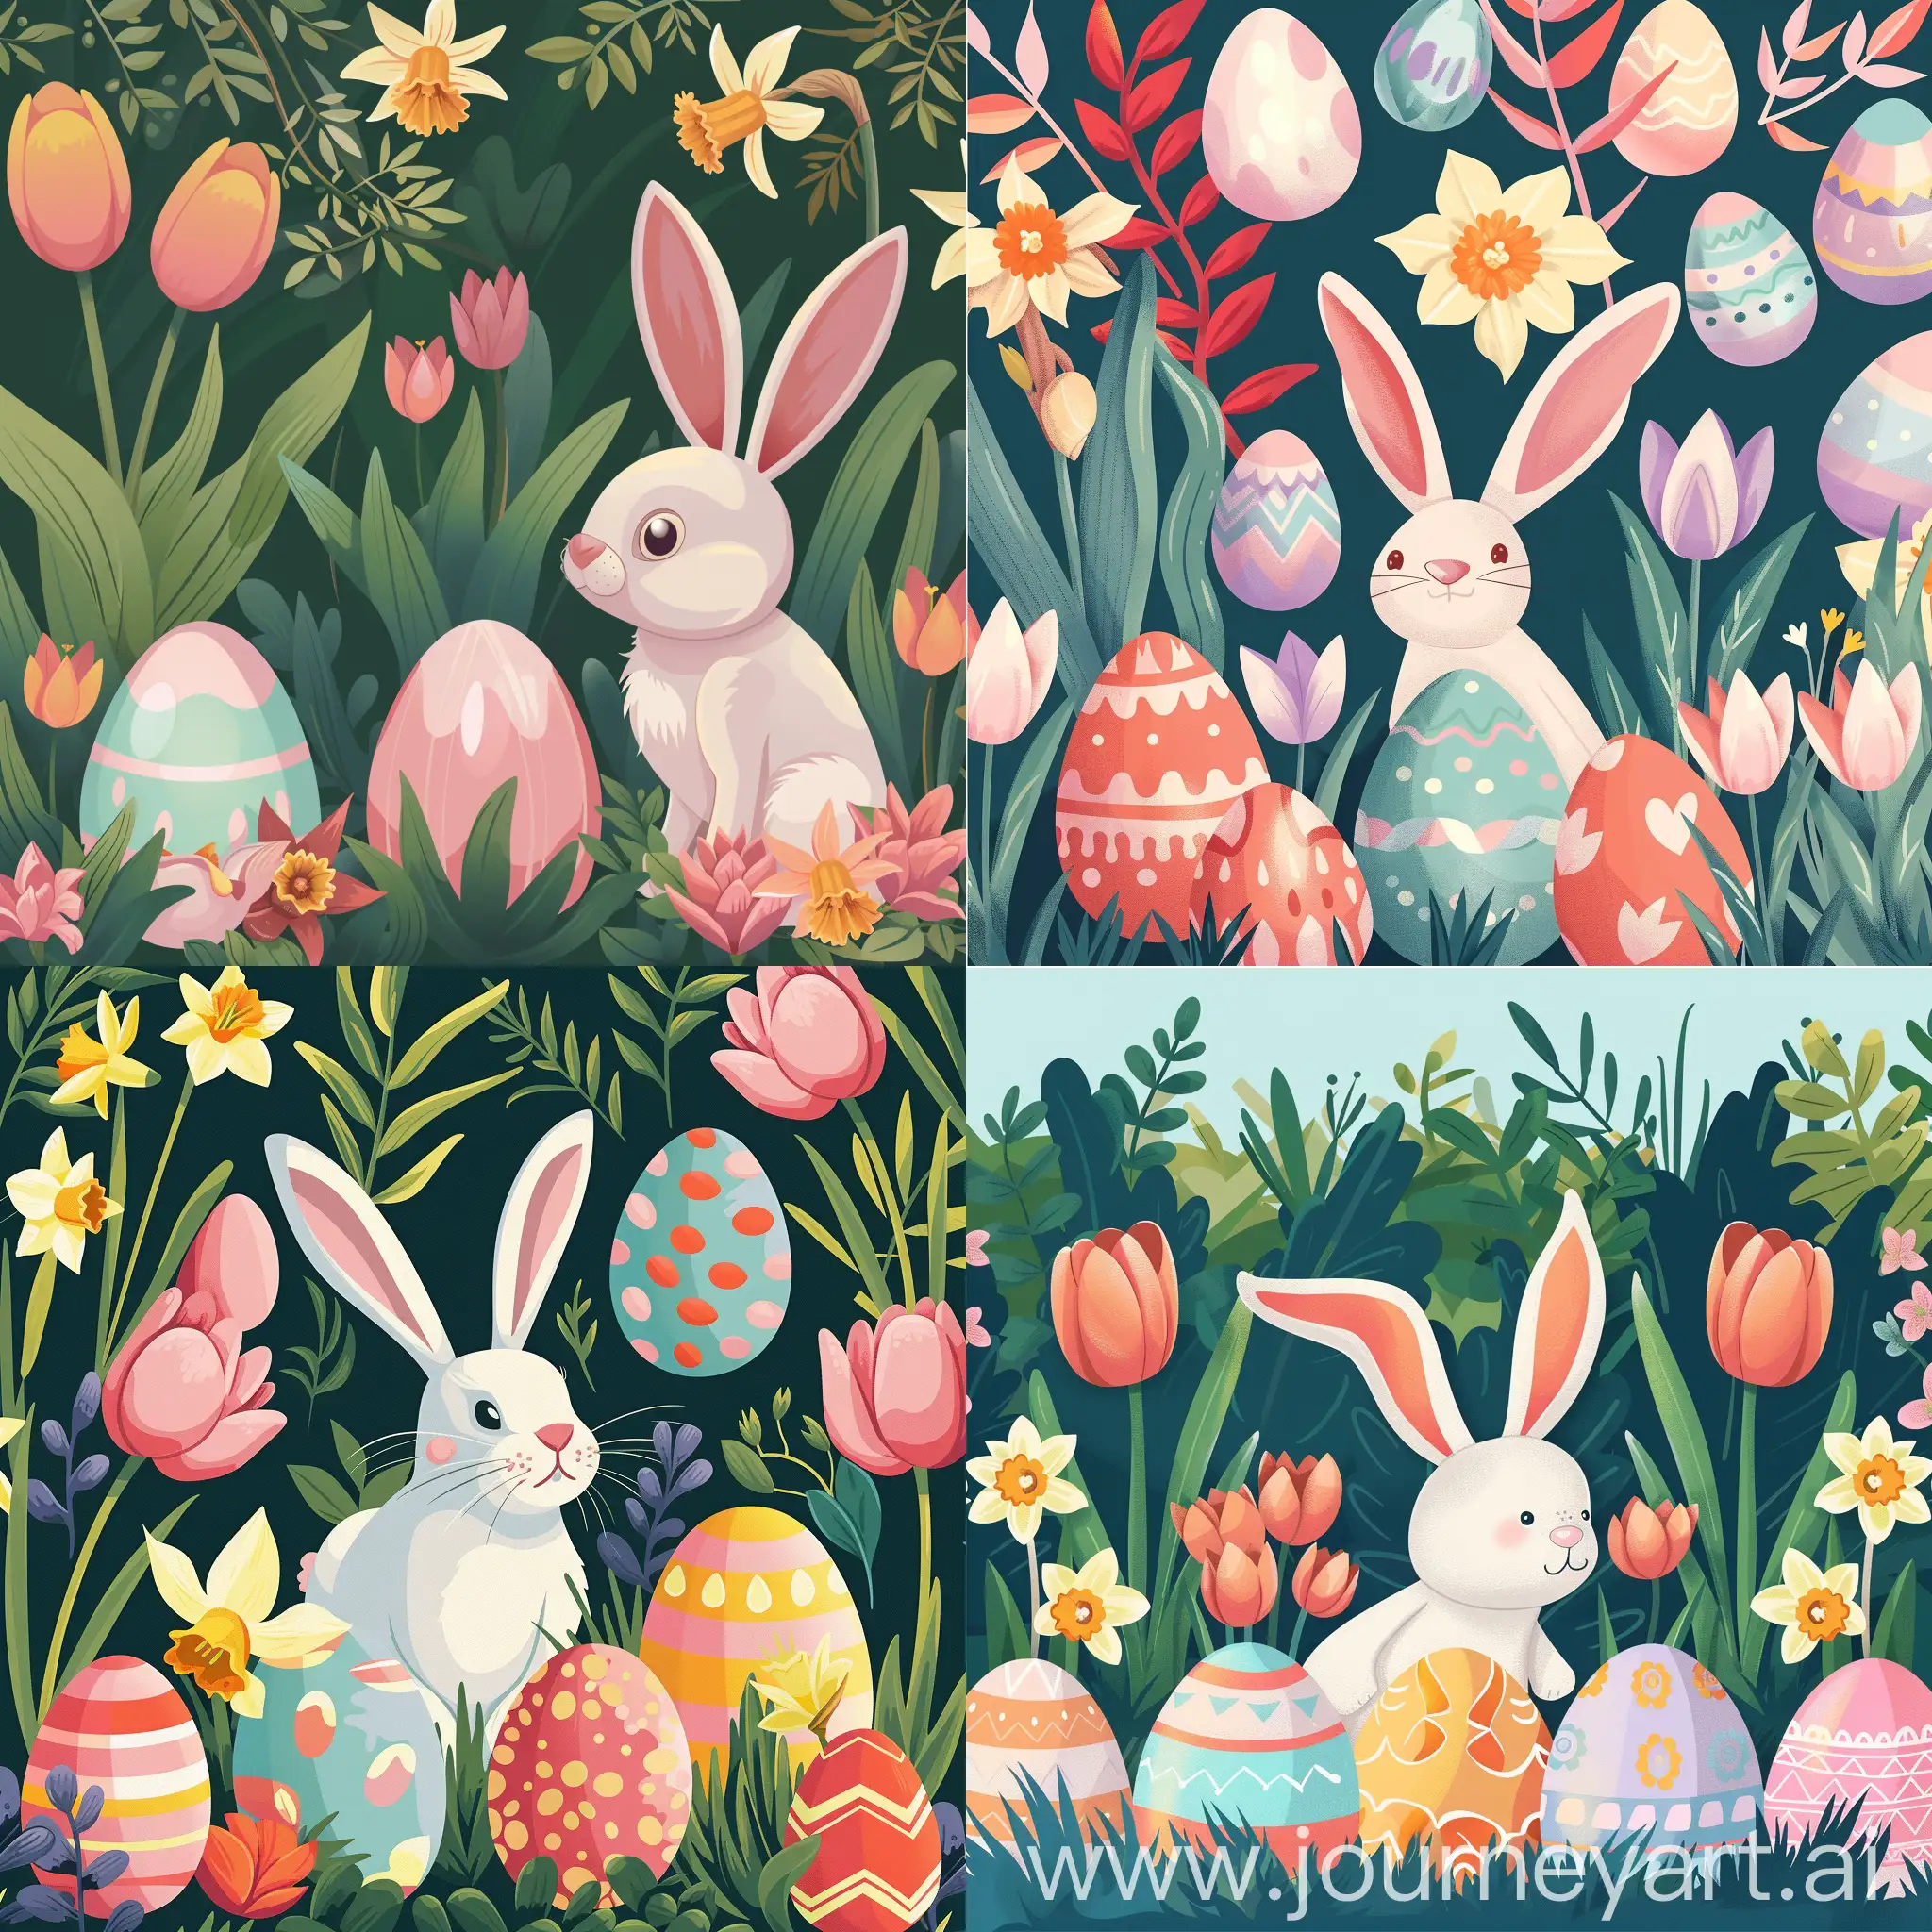 flat illustration of an enchanting scene with pastel-painted eggs in the latest Pantone 2024 colors. Showcase the intricate details with multiple angles, incorporating the charm of a playful Easter bunny and the freshness of spring flowers like tulips and narcissus, in high quality flat style